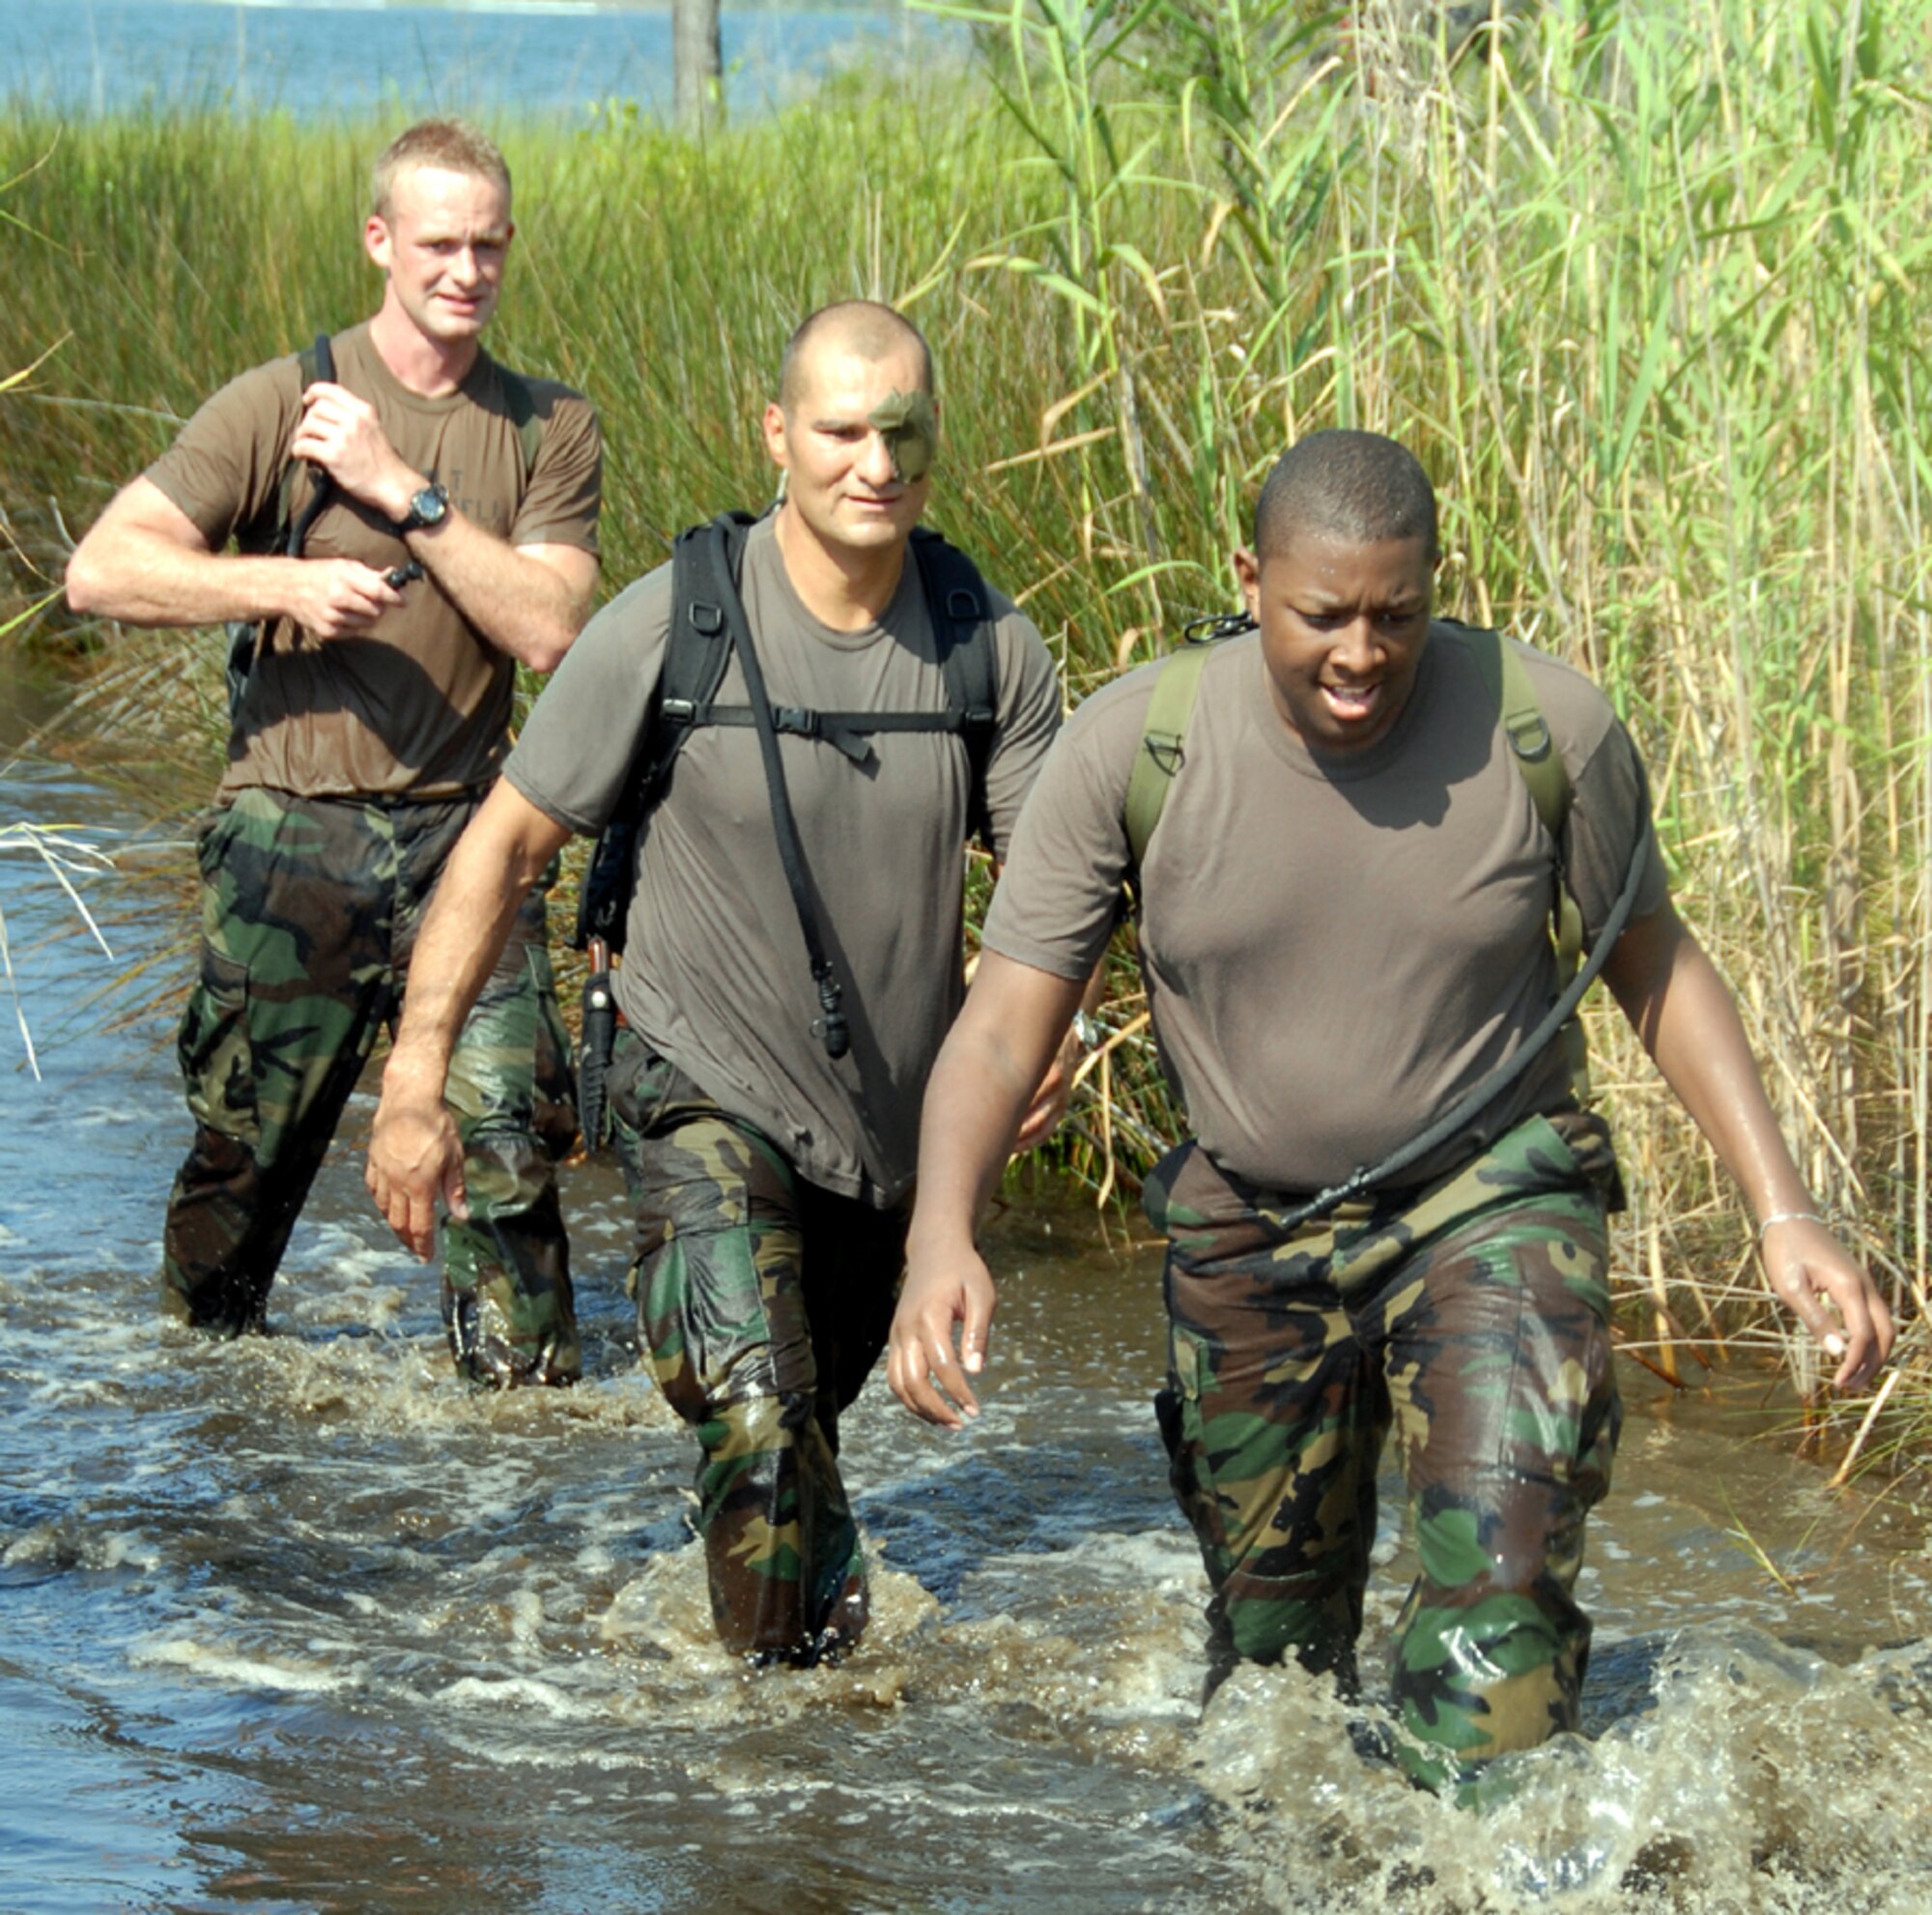 Airyque Ervin makes his way through stagnant water during a grueling special tactics “Monster Mash” competition June 14 at Hurlburt Field.  He is followed by his teammates, Capts. Frank Rodriguez and Eli Mitchell of the 720th Operational Support Squadron Advanced Skills Training Center.  Airyque, who spent two days earning Honorary Air Commando honors as a Make-A-Wish recipient, is from Vallejo, Calif.  (U.S. Air Force photo by Chief Master Sgt. Gary Emery)